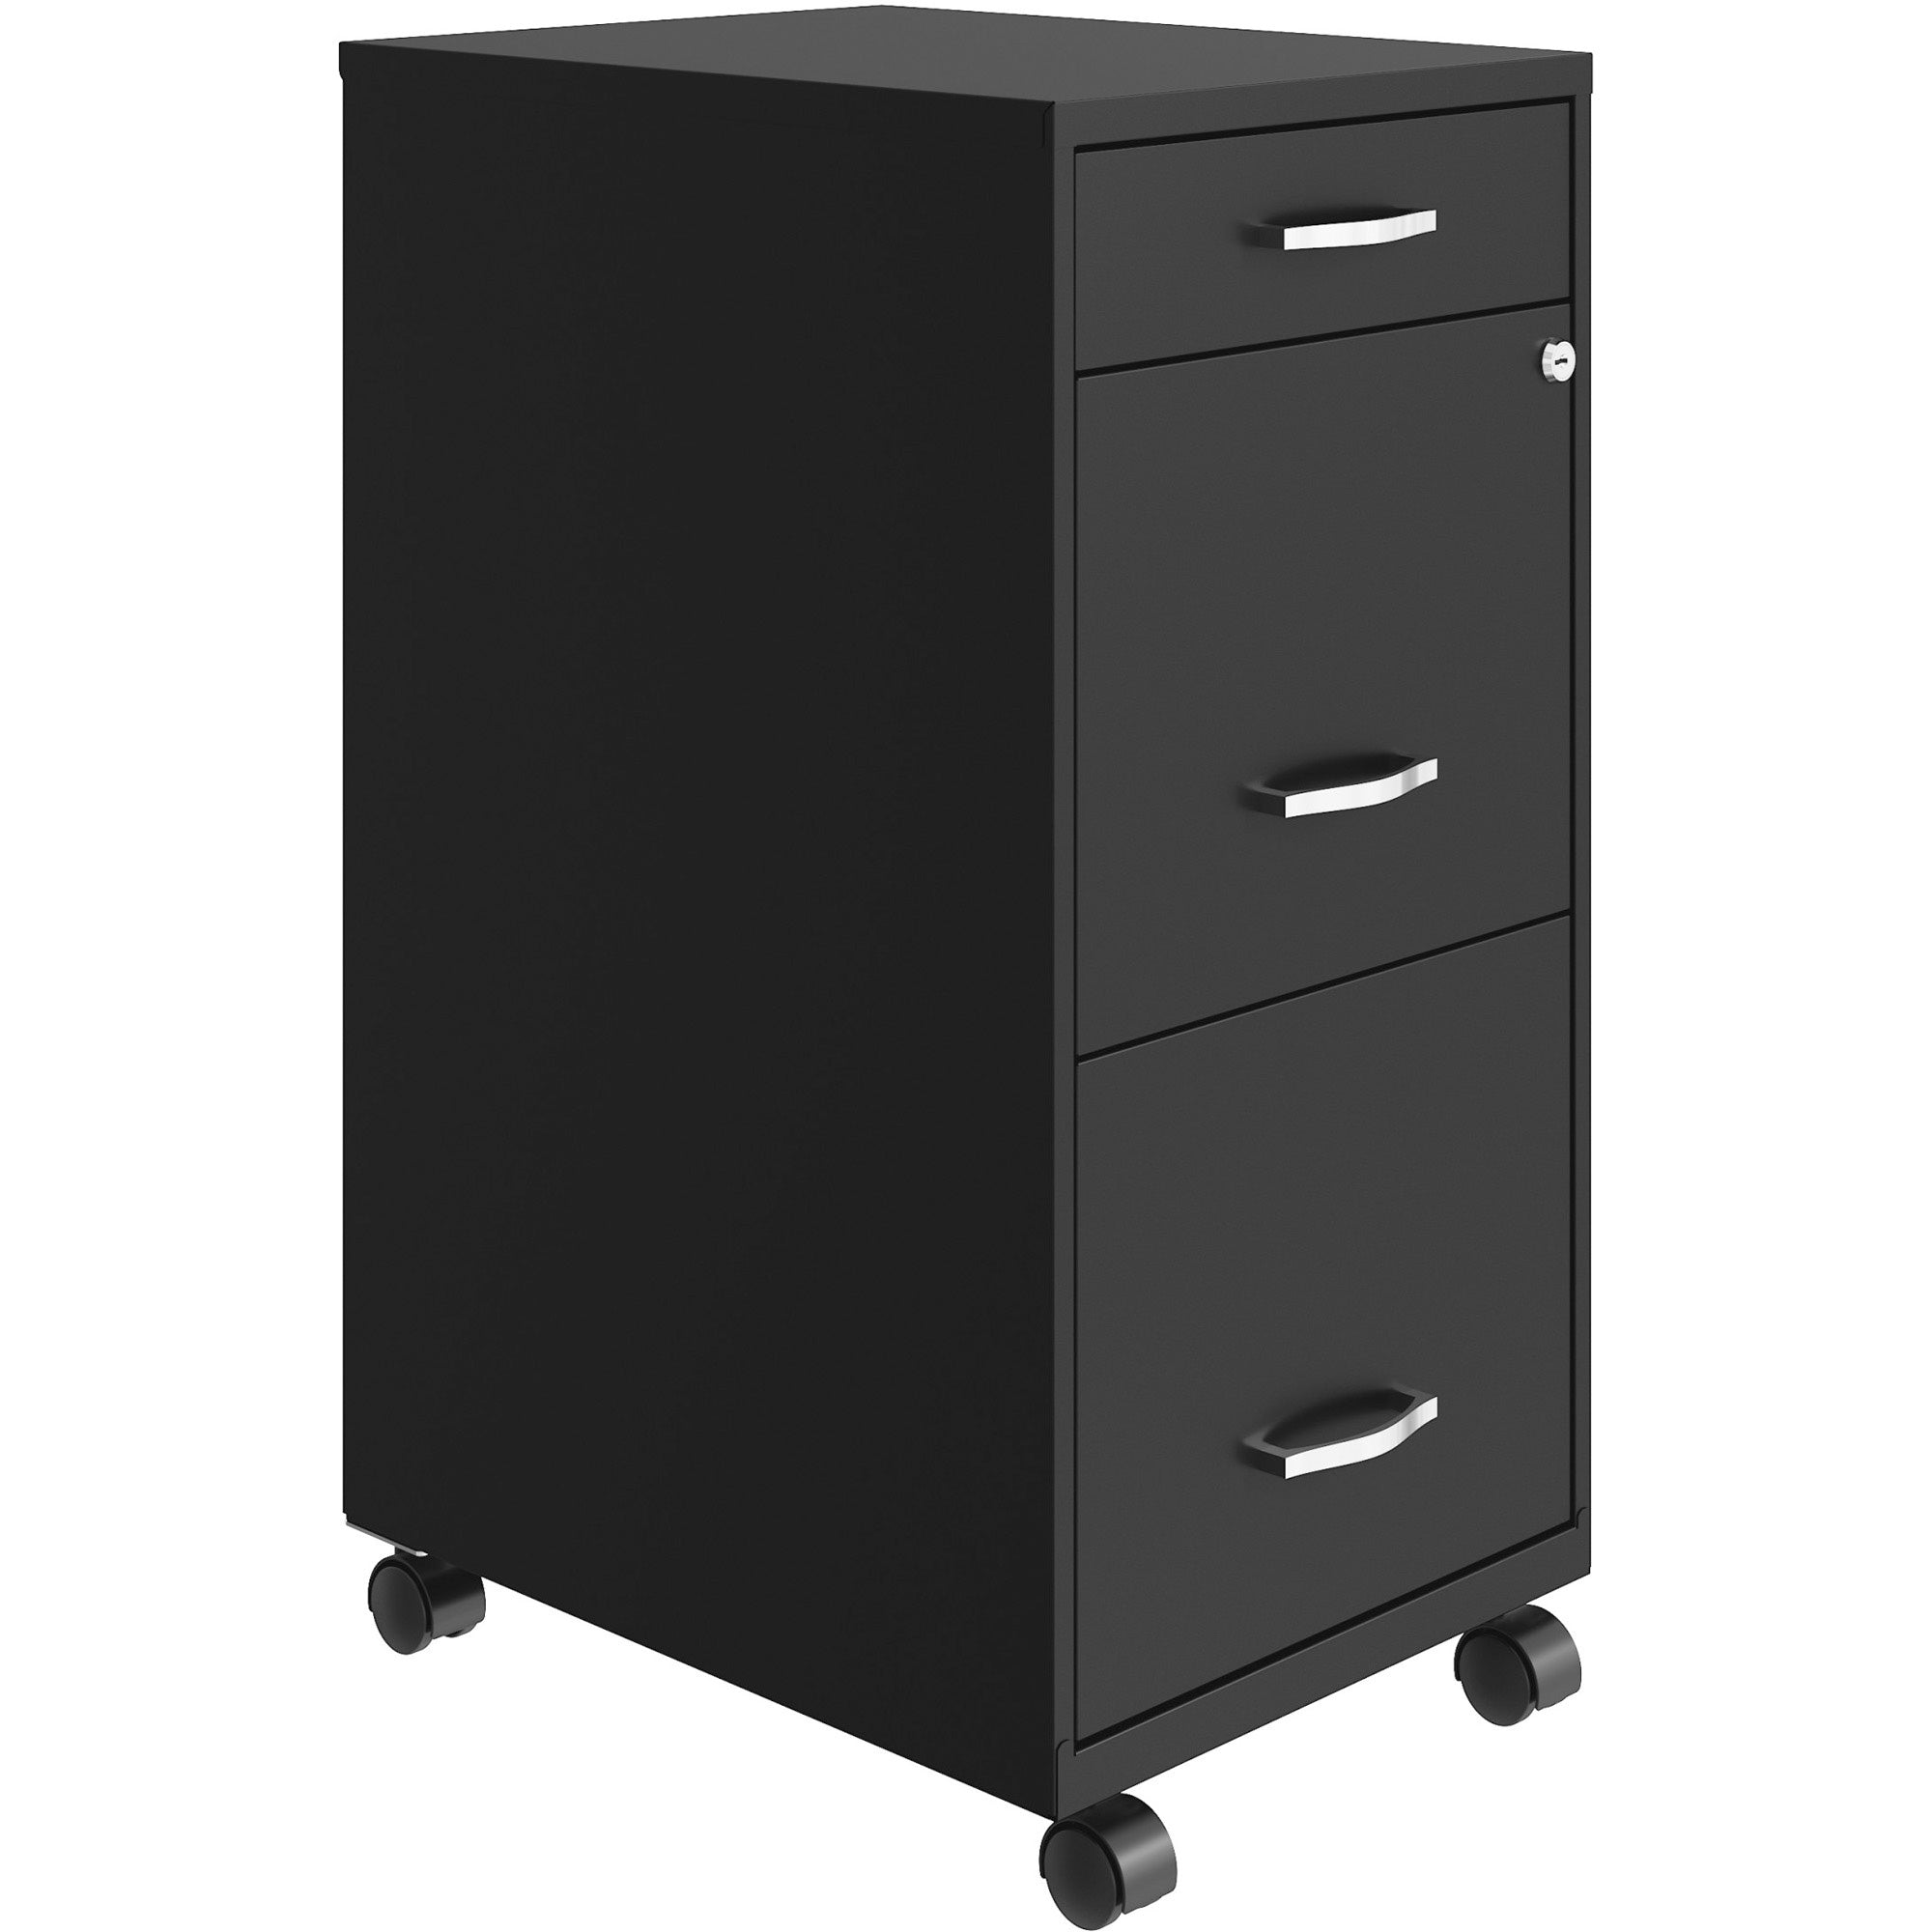 nusparc-mobile-file-cabinet-142-x-18-x-295-3-x-drawers-for-file-box-letter-mobility-locking-drawer-glide-suspension-3-4-drawer-extension-cam-lock-nonporous-surface-black-painted-steel-recycled_nprvf318bmbk - 1